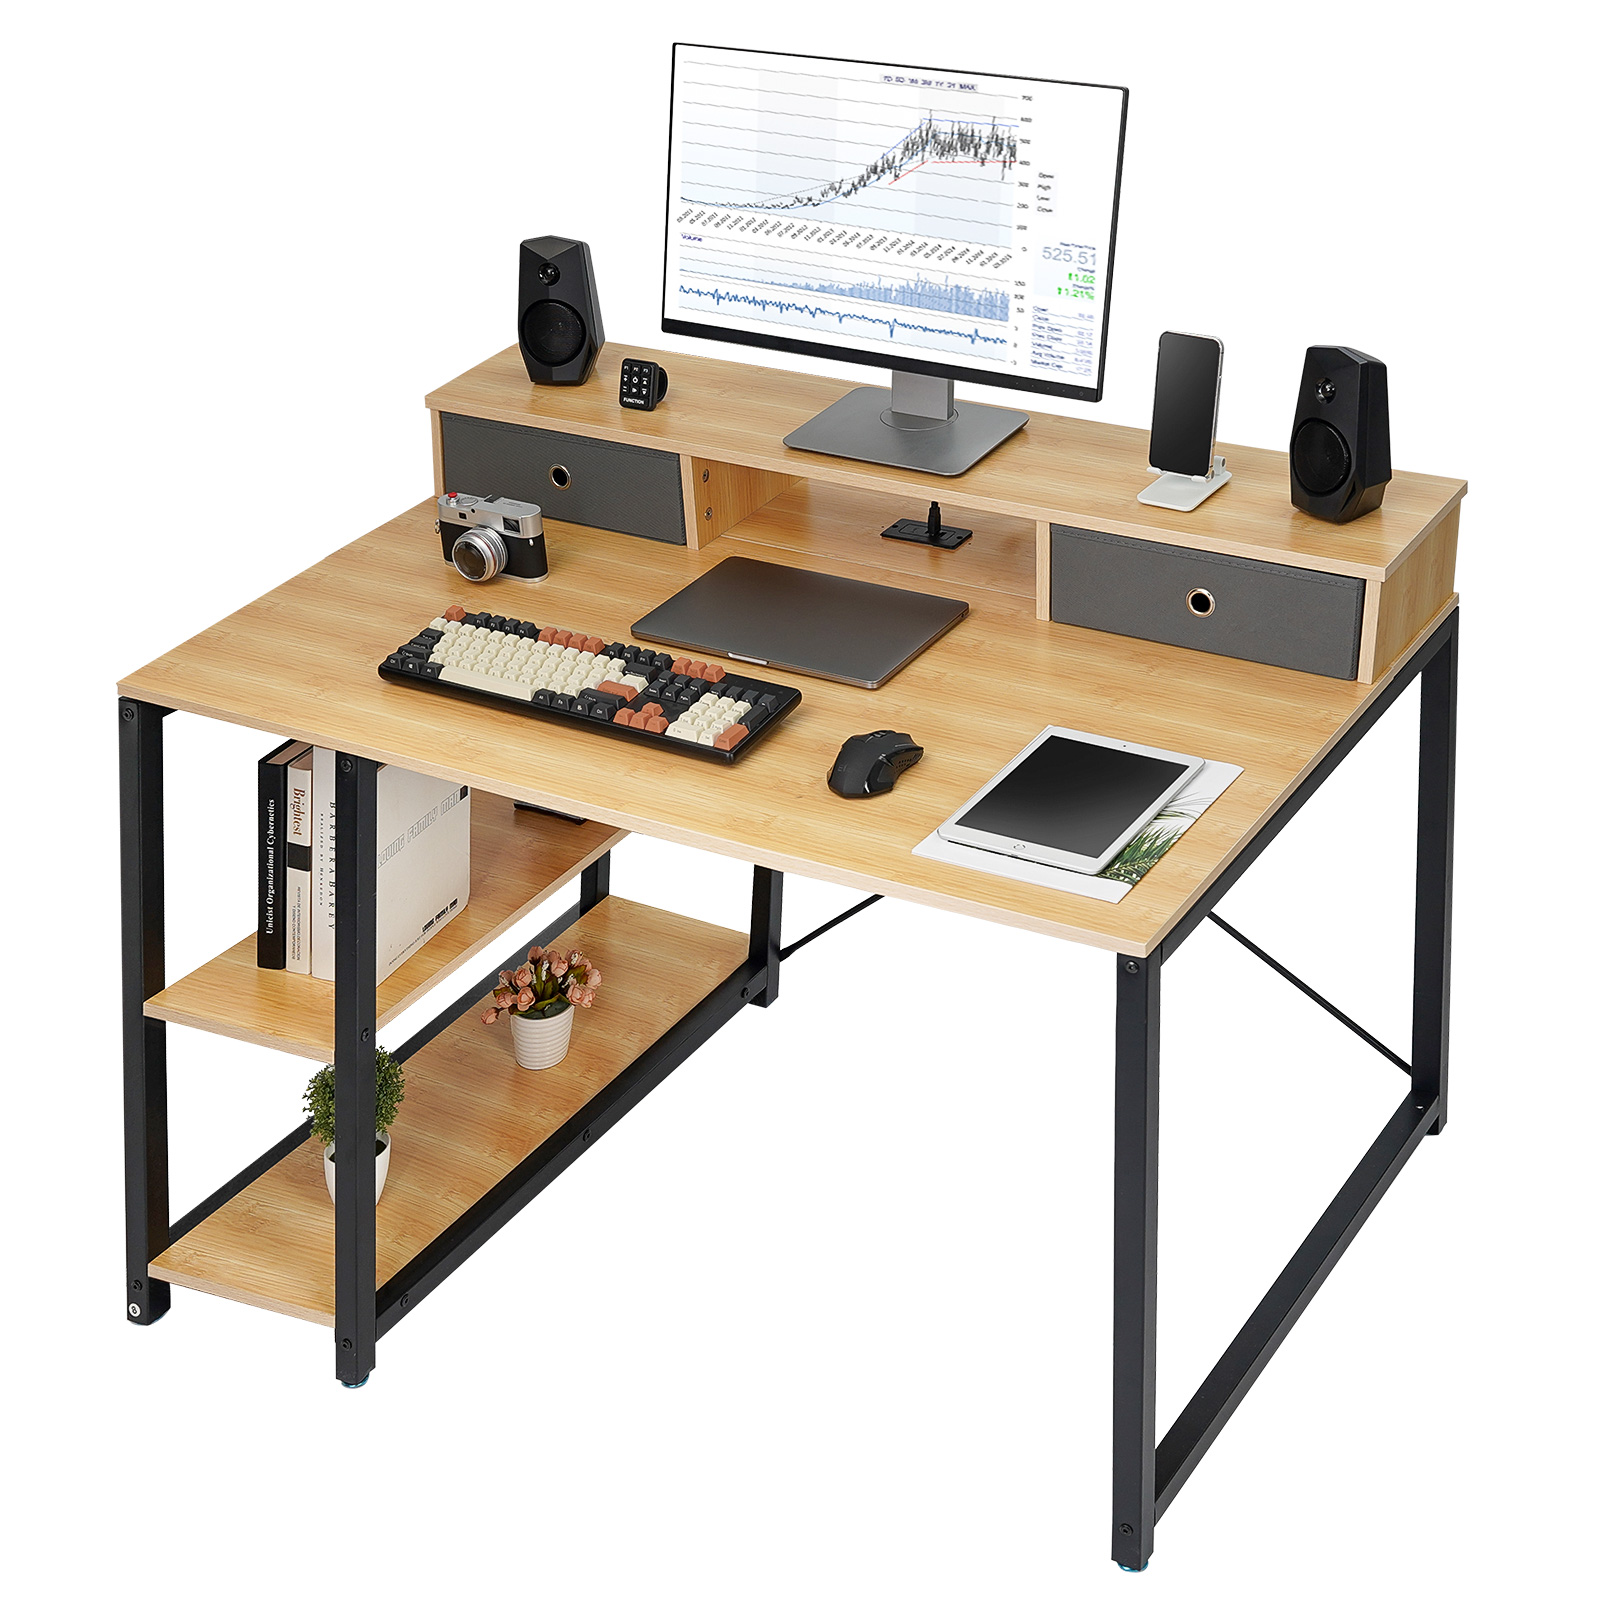 TOPSKY 47”x 31.5” Computer Desk with Drawers, Monitor Stand, Storage Shelf, 3-Port Charging Station CT-8028